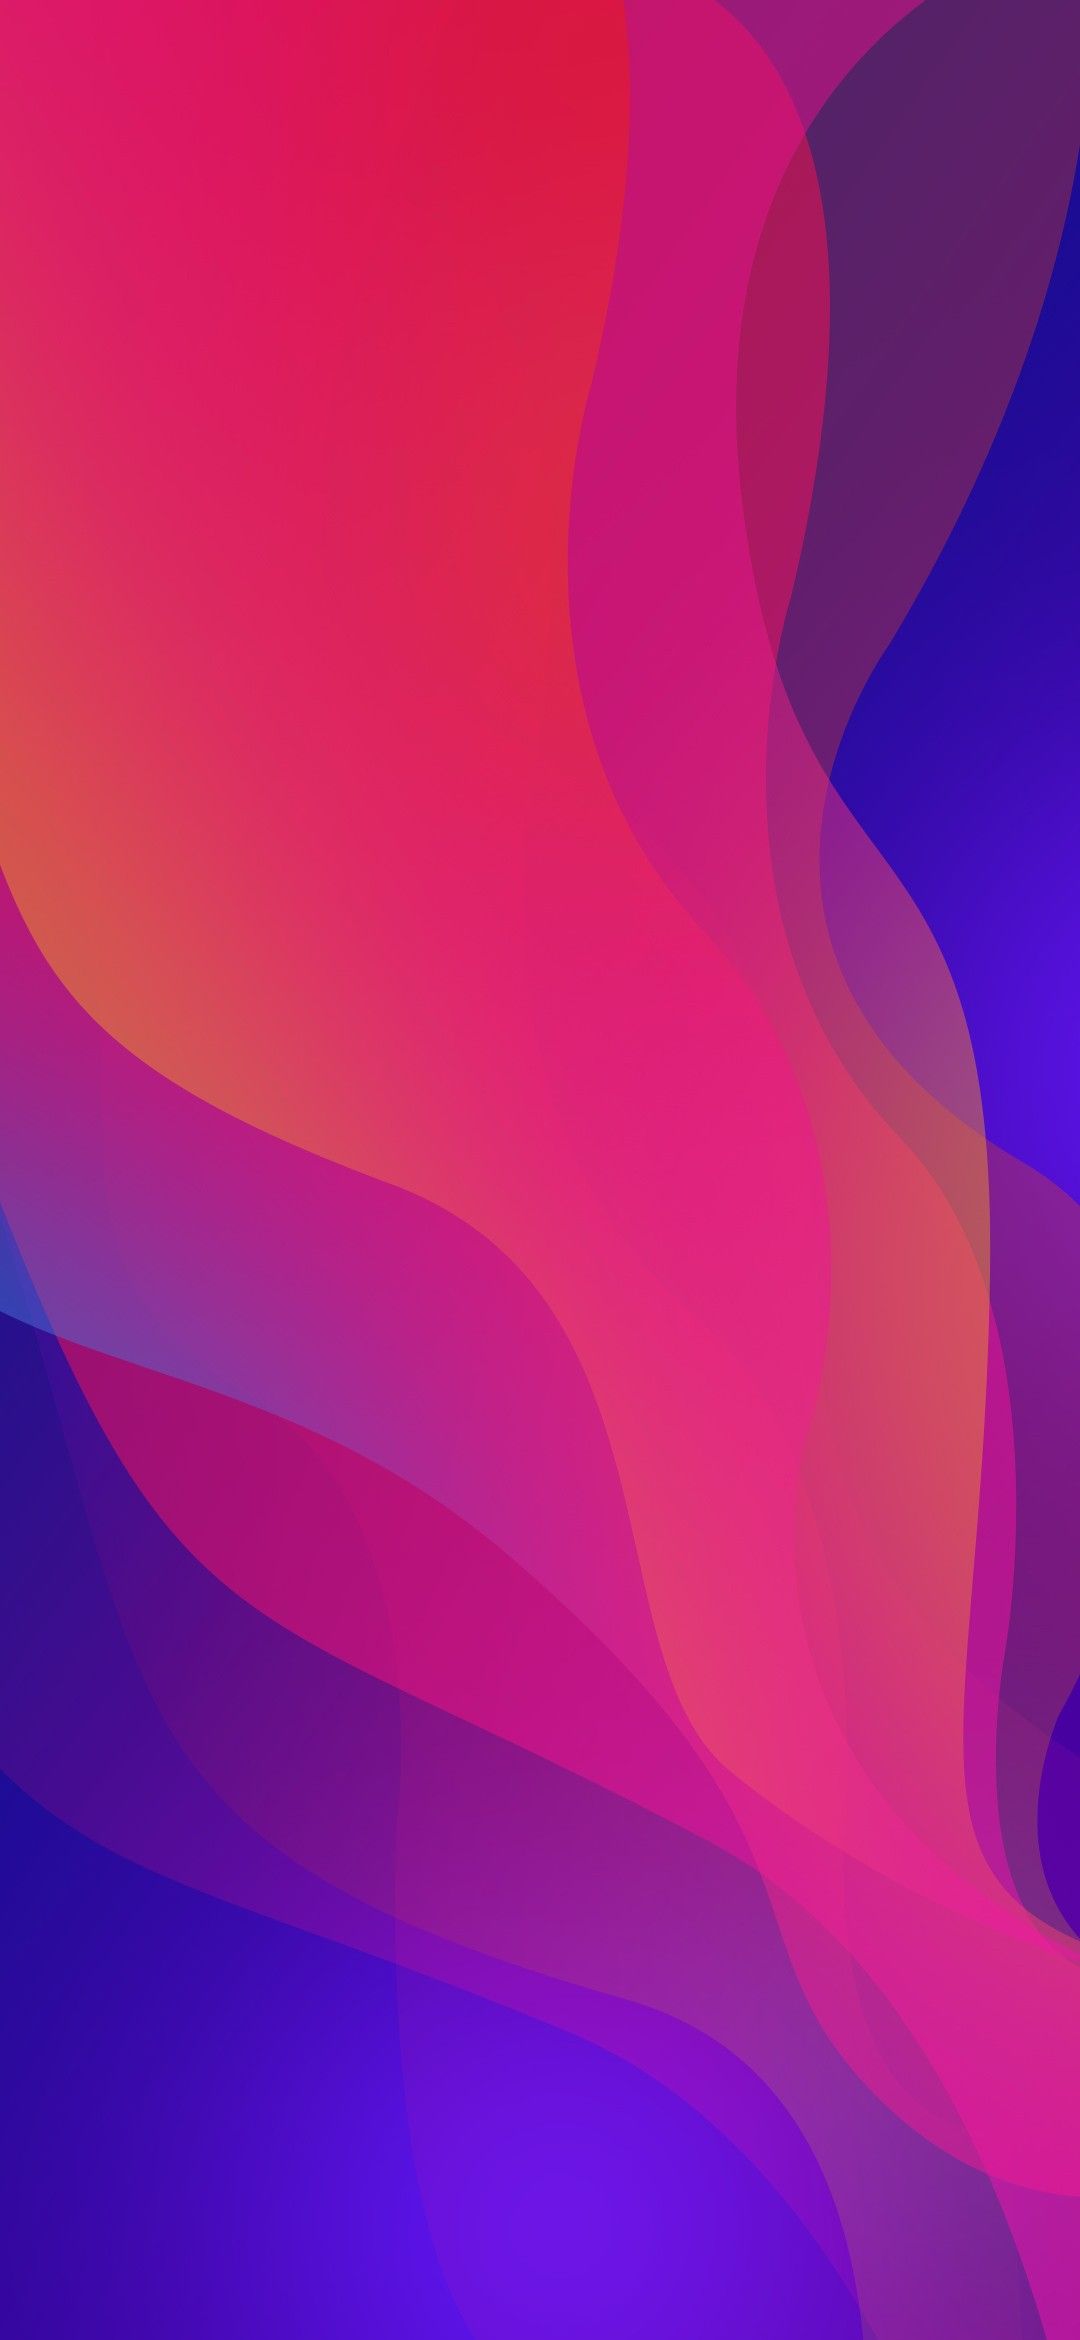 Free download Oppo Find X Abstract Amoled Liquid Gradient